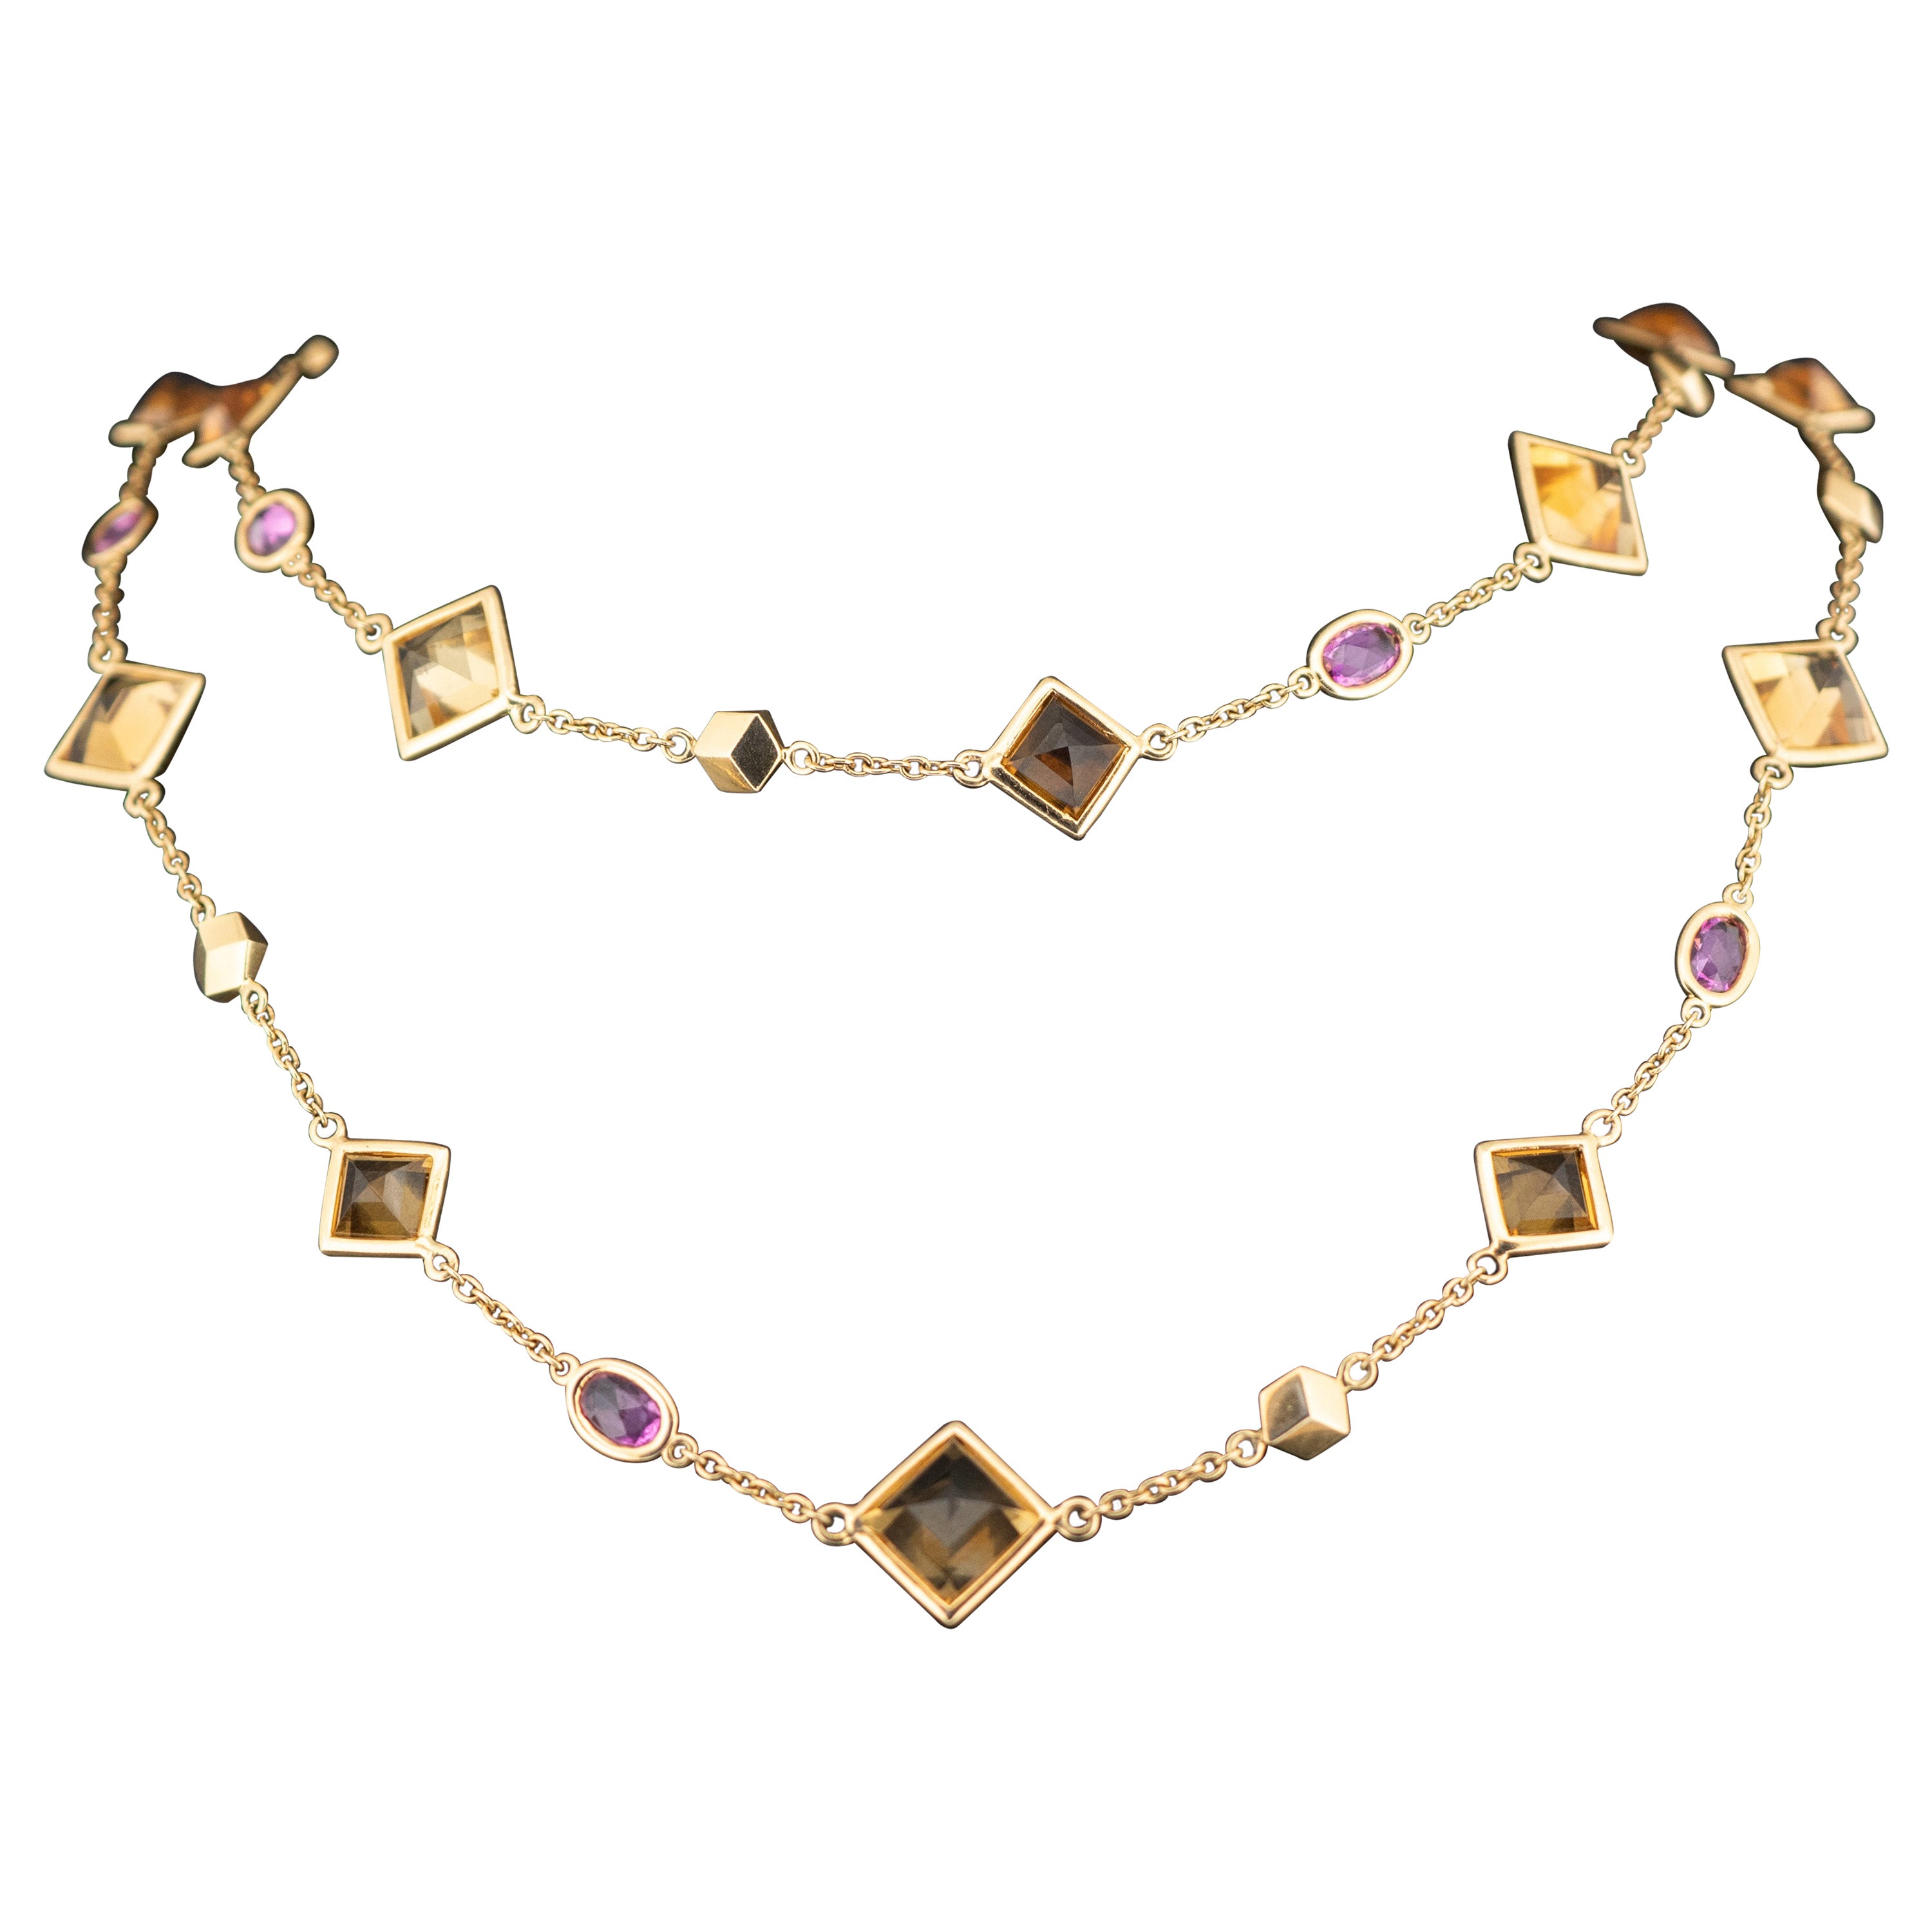 Paolo Costagli 18 Karat Yellow Gold 38.65 Carat Citrine and Sapphire Necklace